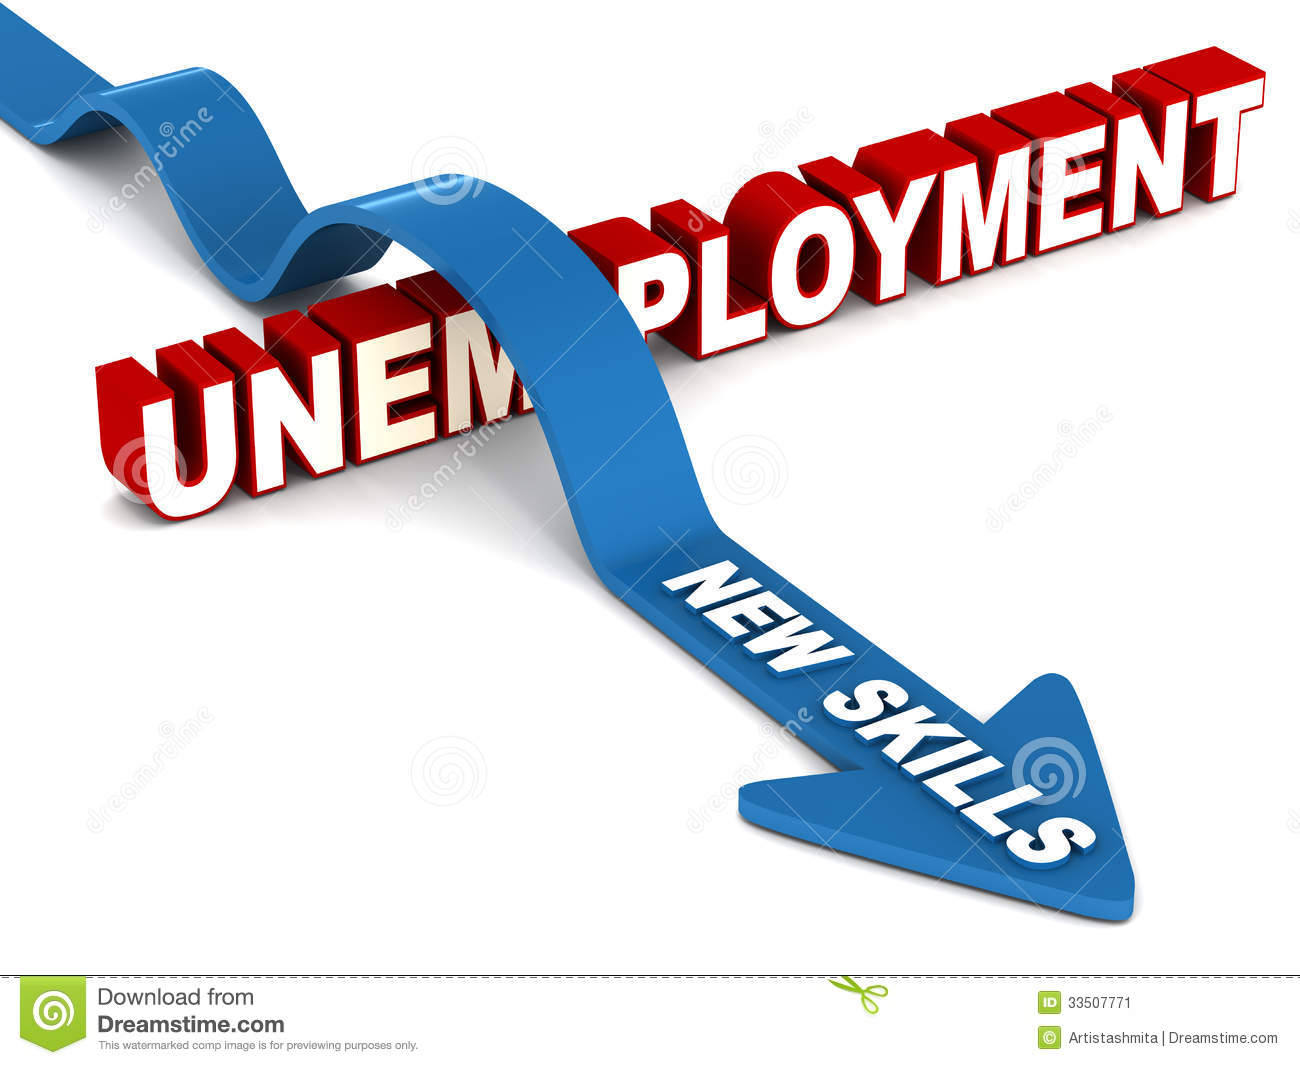 New Skills Overcome Unemployment Concept Gaining New Skill Set To